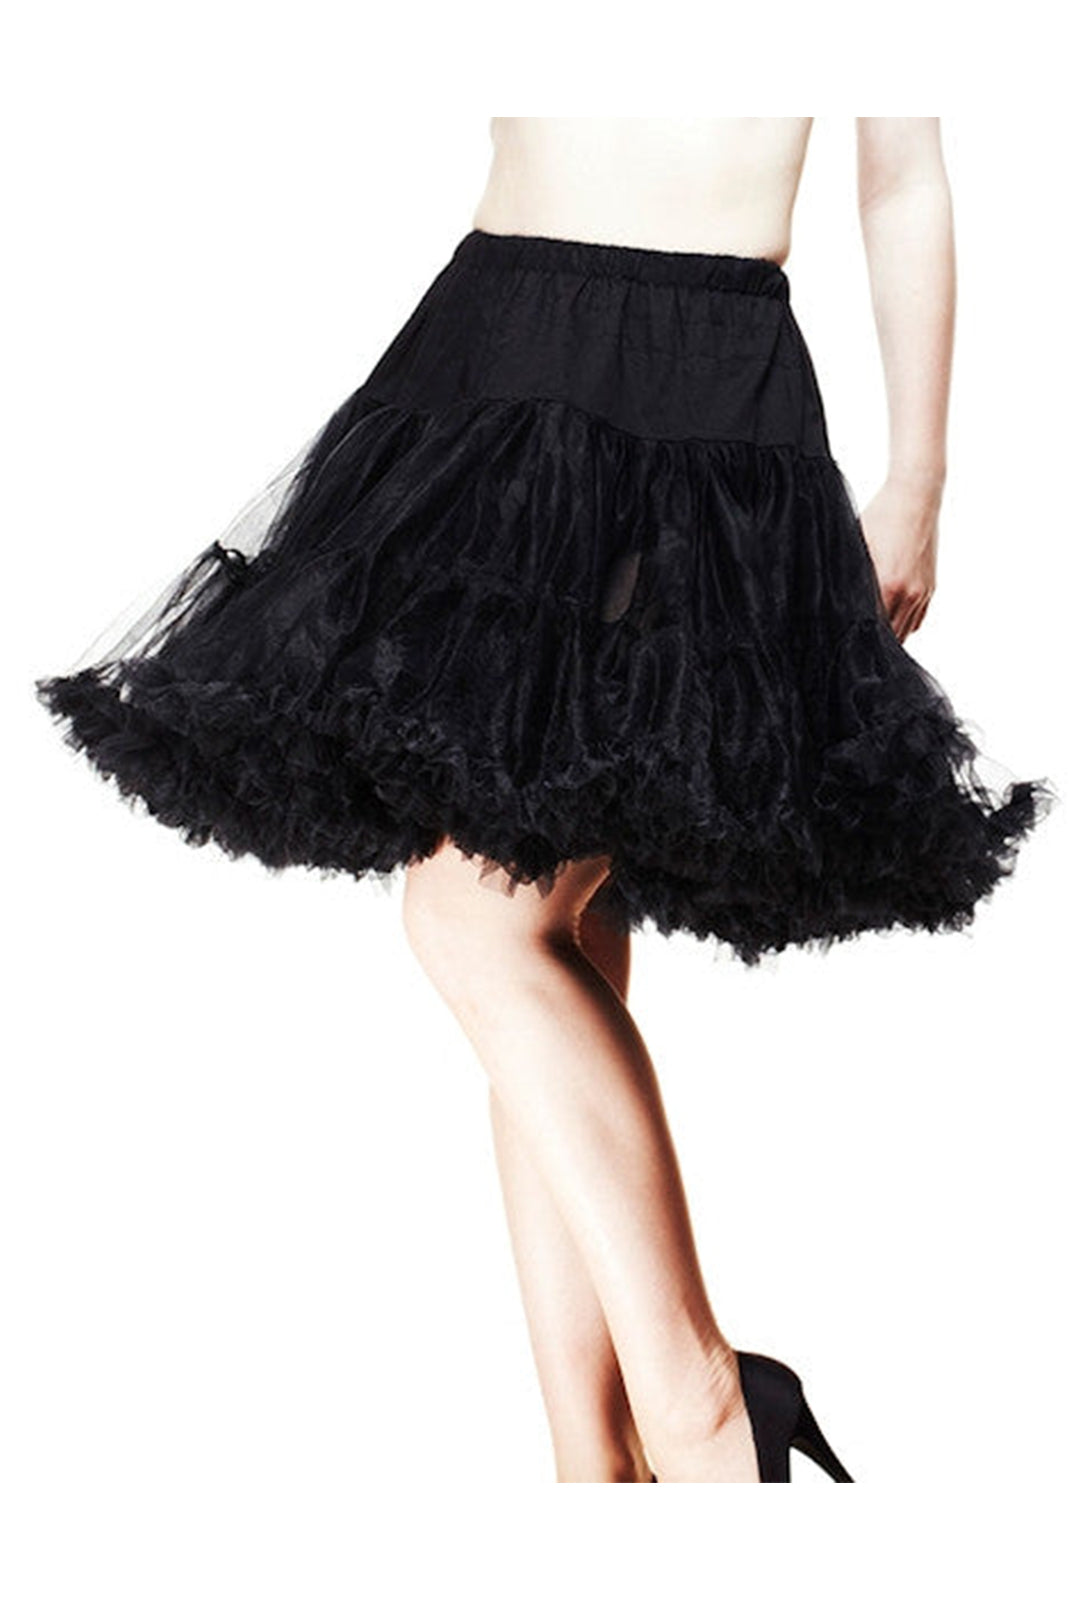 Deluxe Two Tiered Black Petticoat